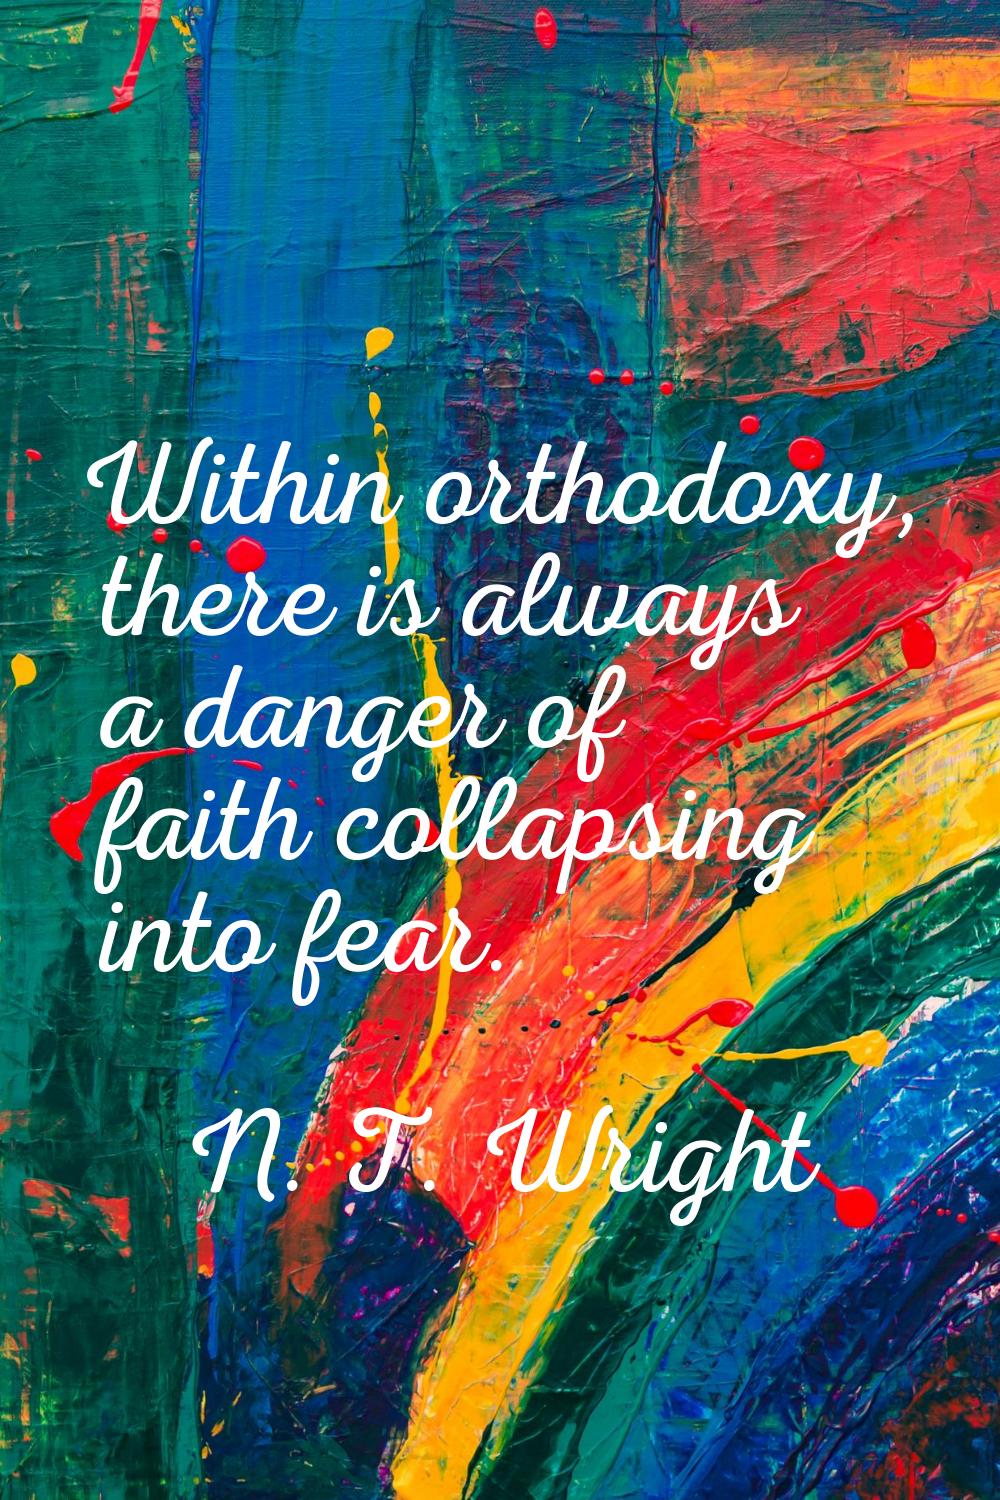 Within orthodoxy, there is always a danger of faith collapsing into fear.